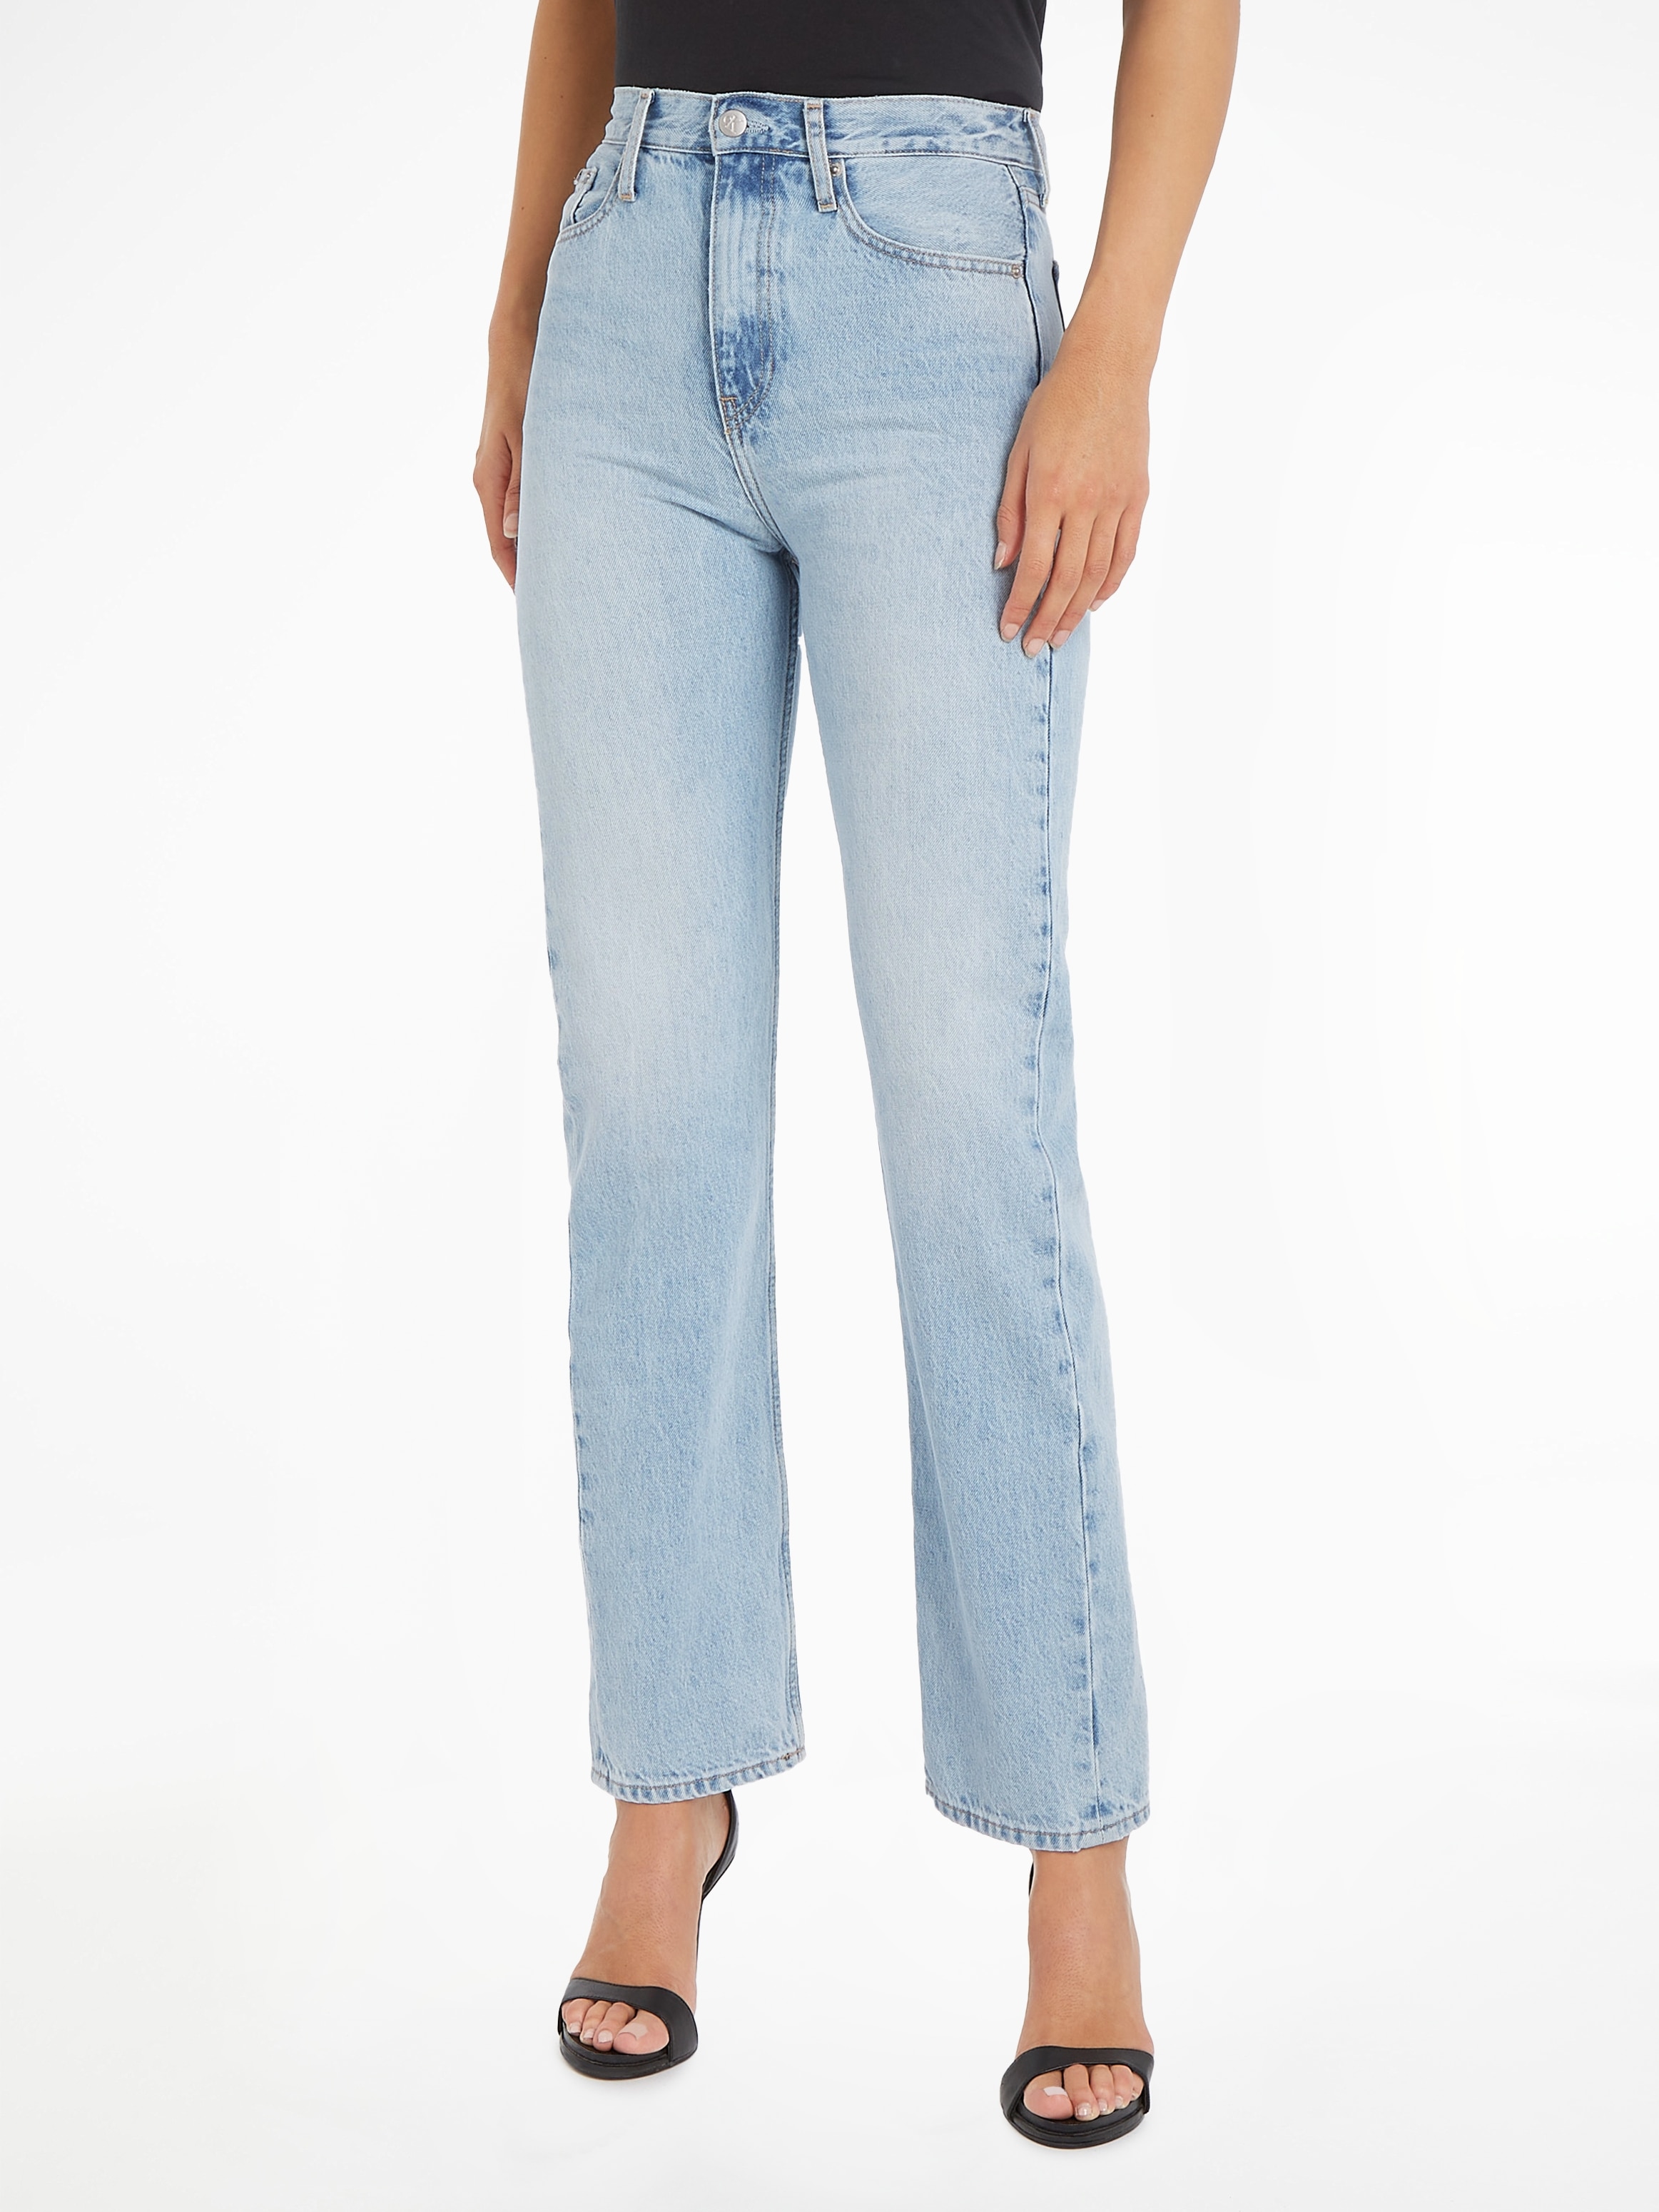 Calvin Klein »HIGH bei STRAIGHT«, 5-Pocket-Style im Straight-Jeans ♕ Jeans RISE